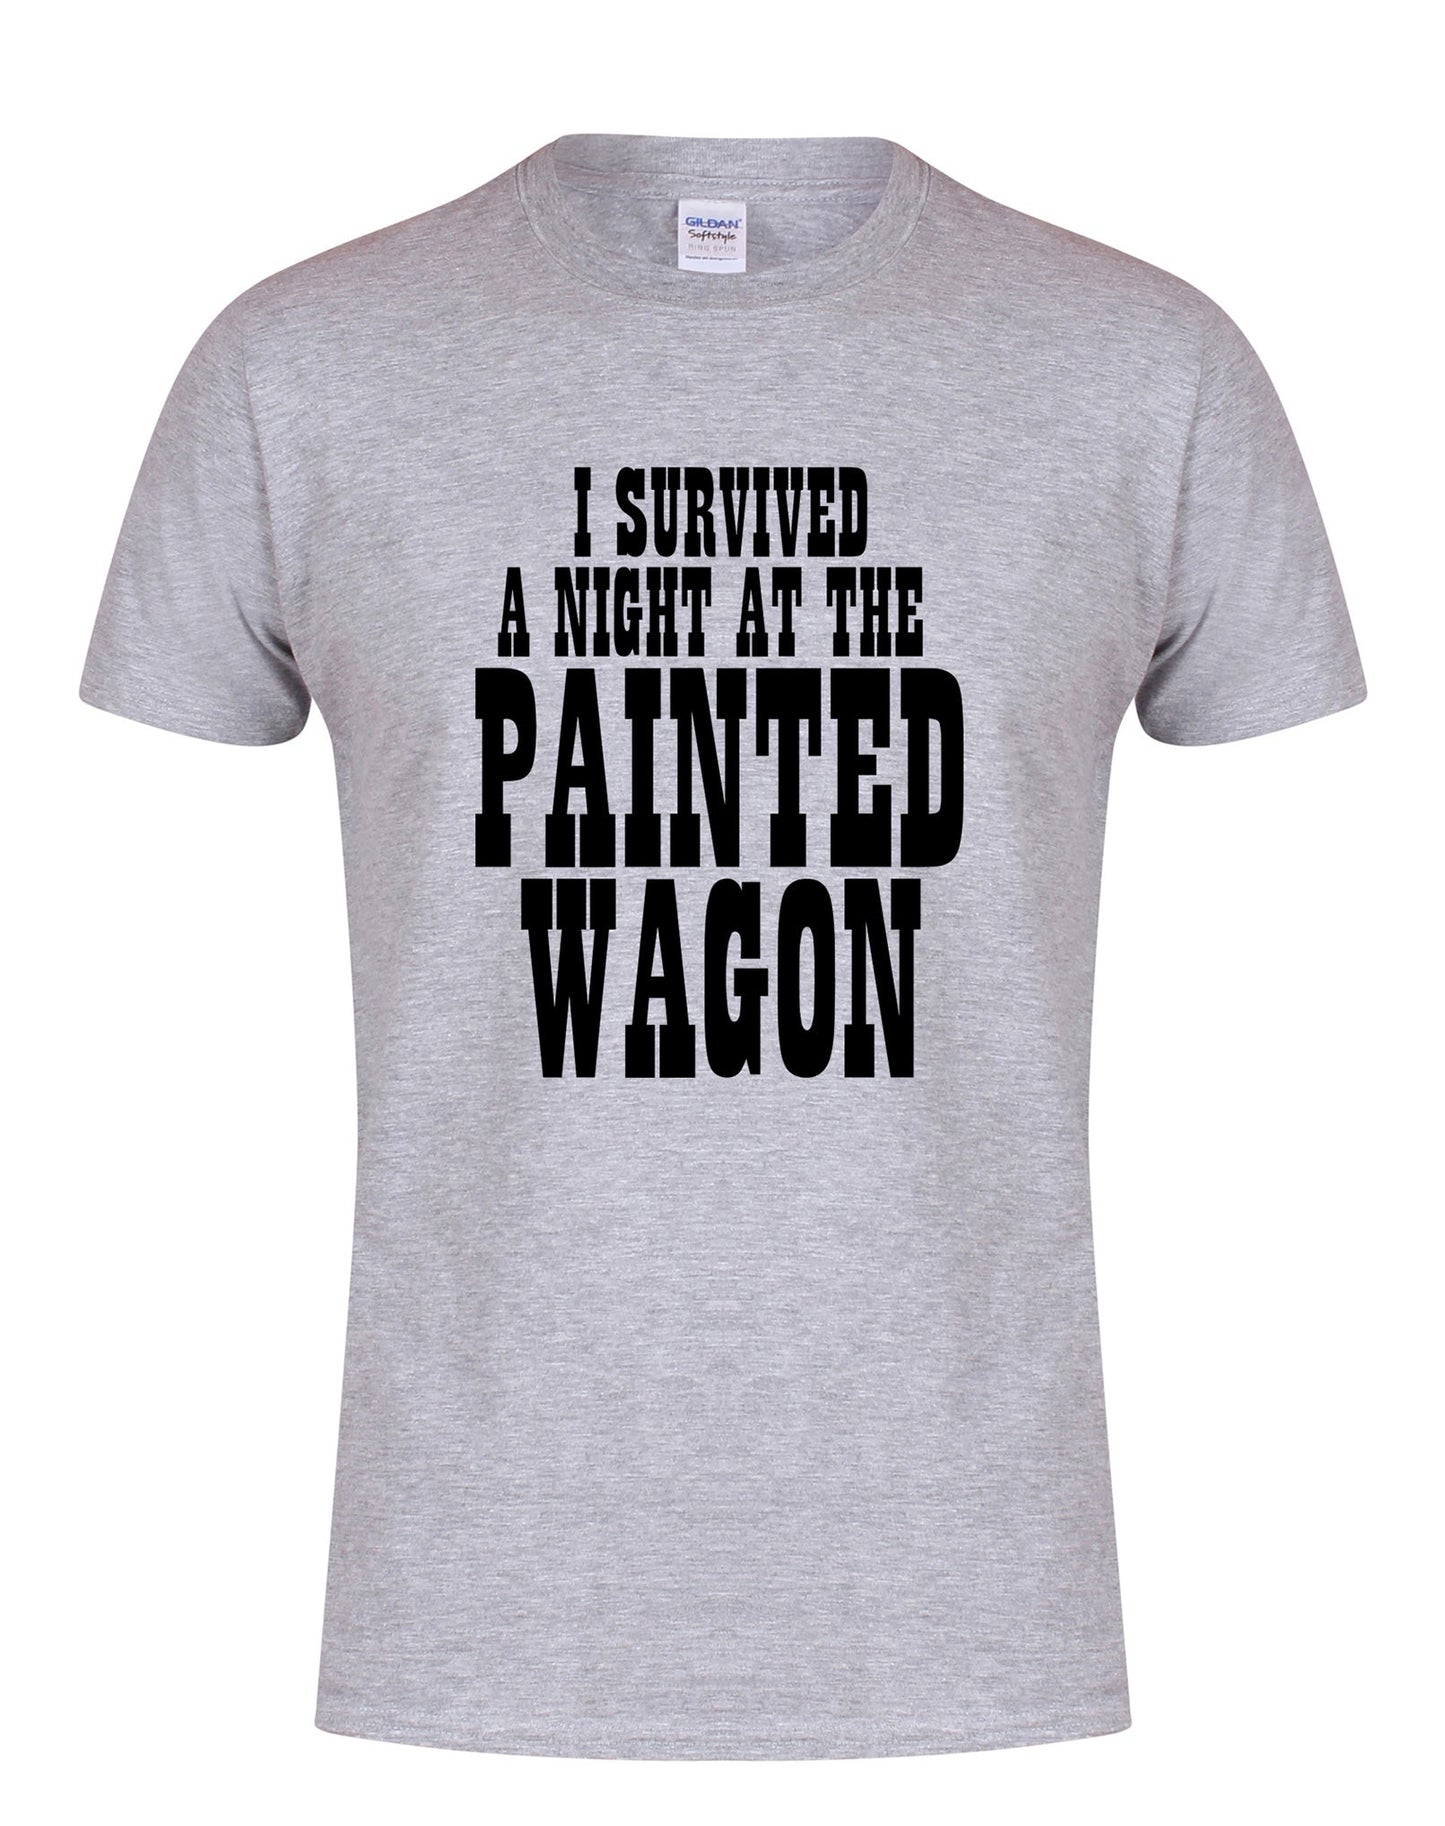 Painted Wagon unisex fit T-shirt - various colours - Dirty Stop Outs